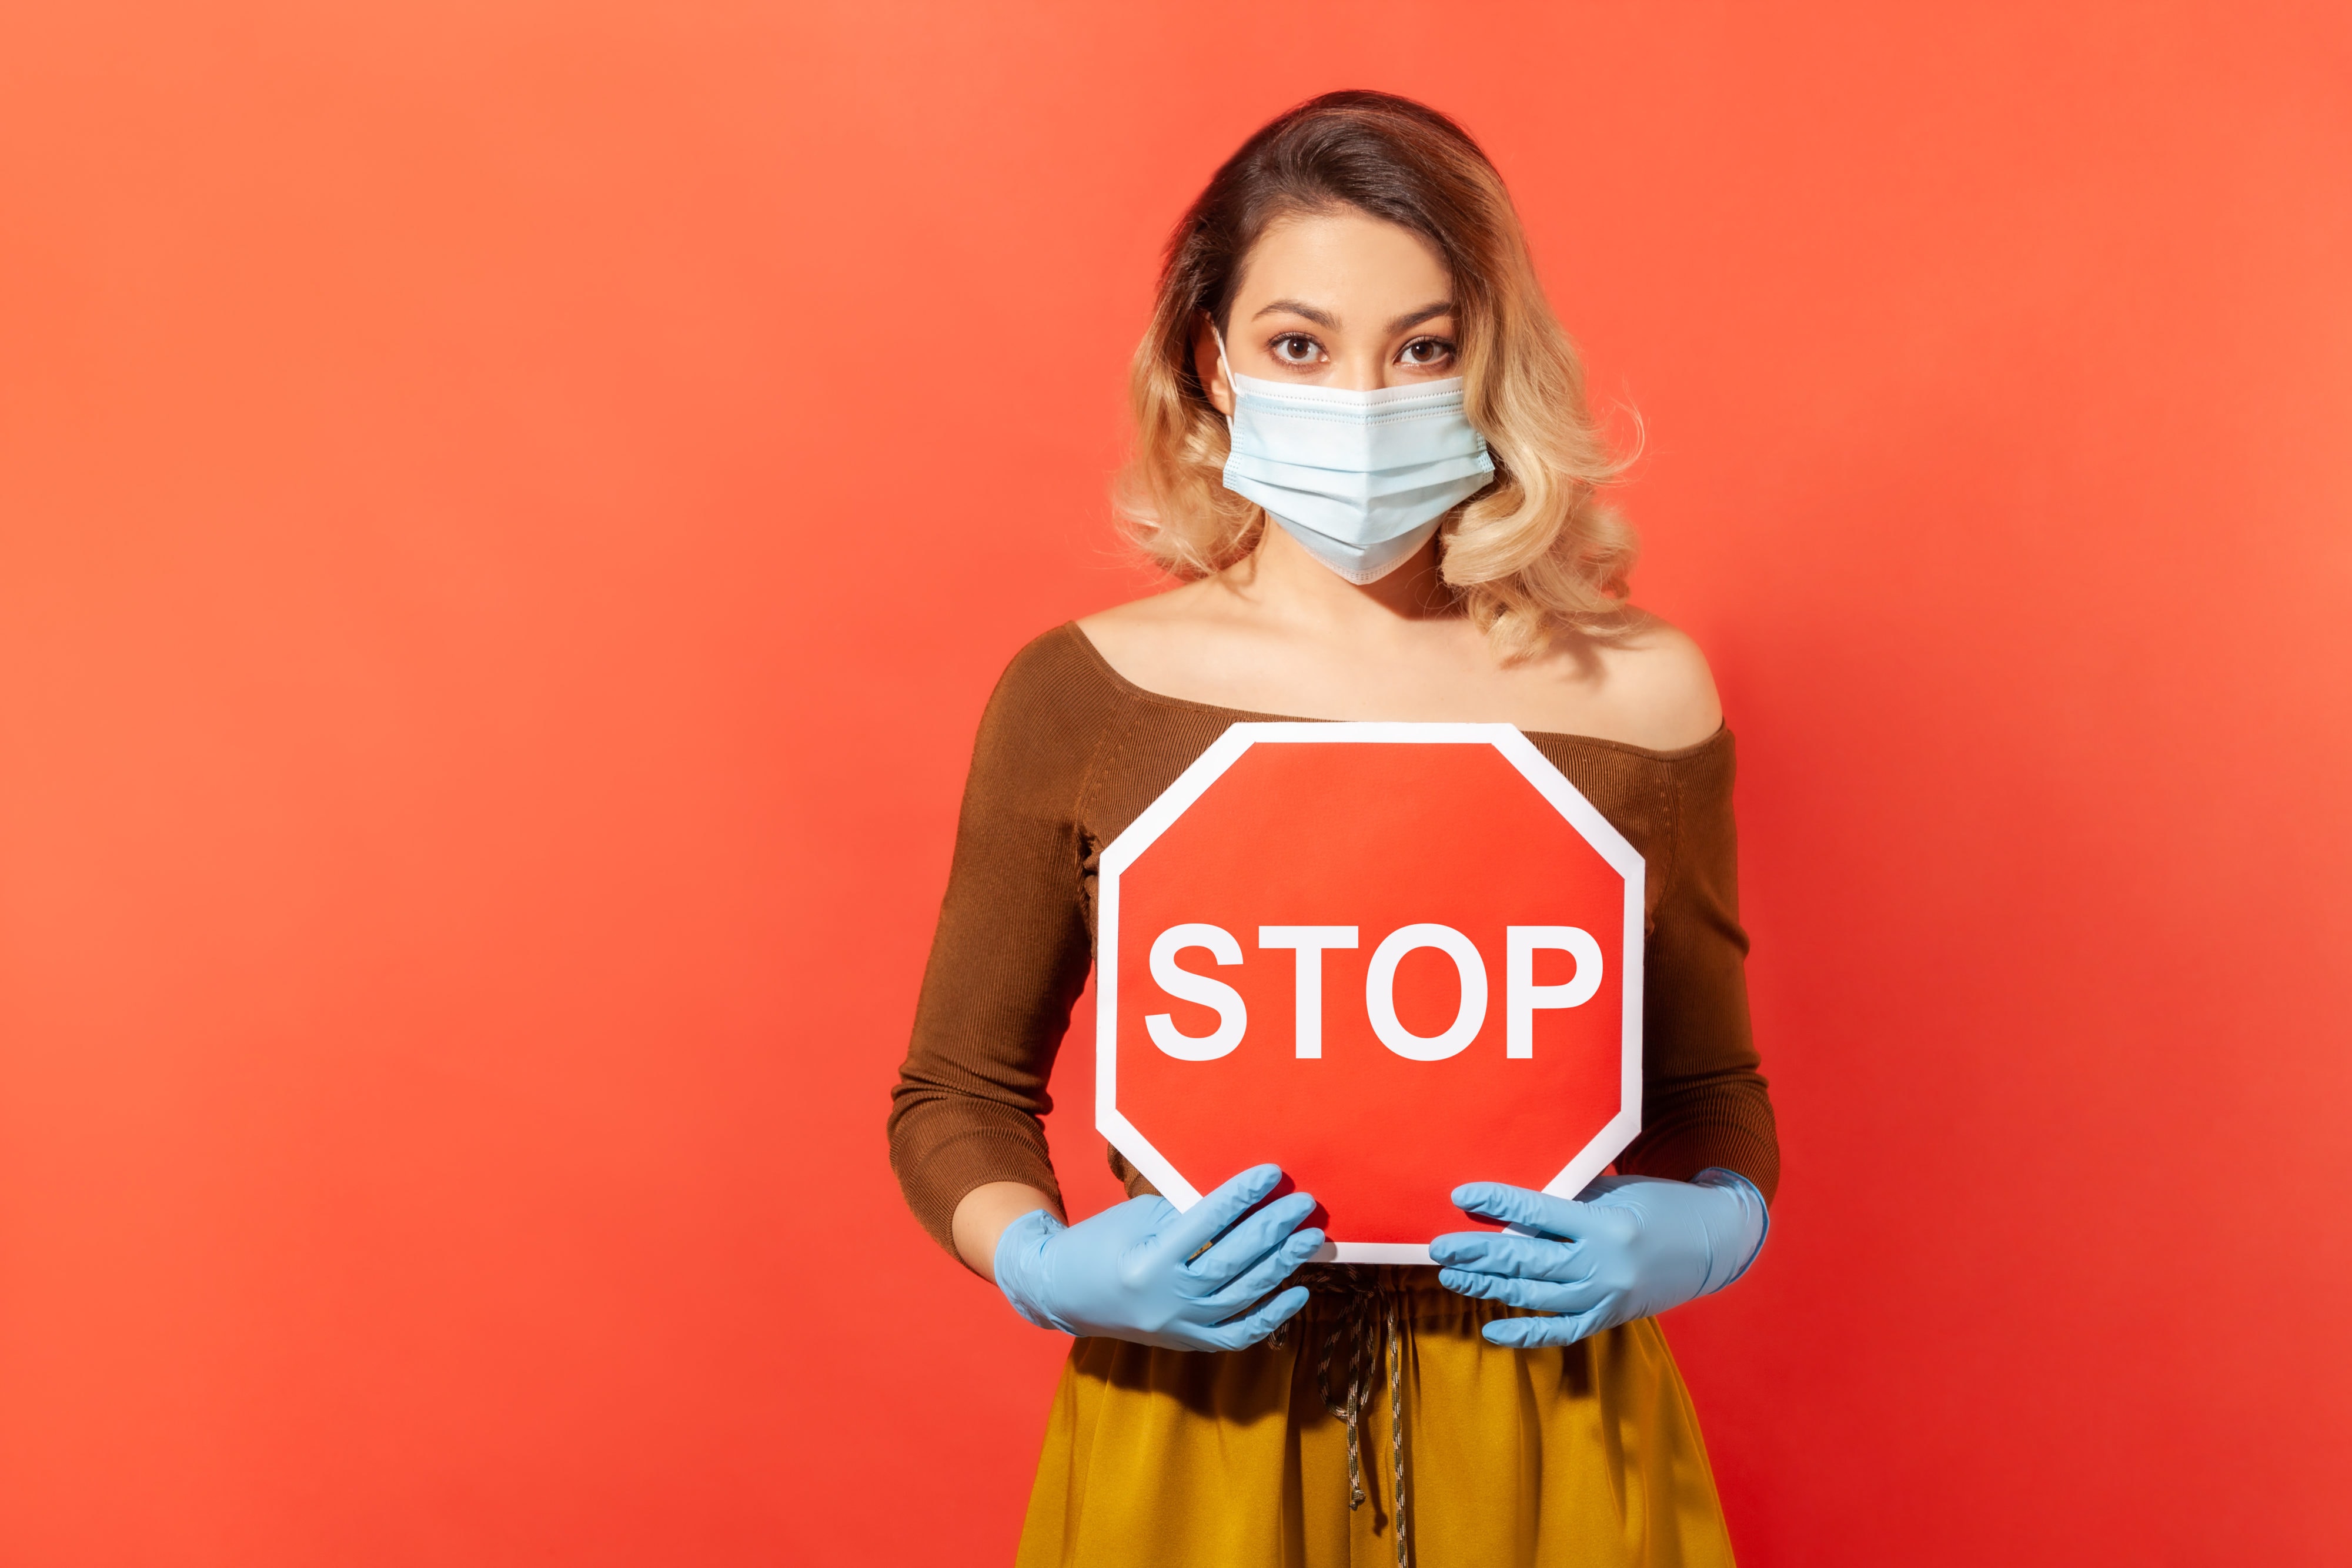 Woman in surgical face mask and gloves holding Stop road traffic sign, concept of quarantine and prohibitions, restrictions during coronavirus covid-19 pandemic self-isolation. studio shot isolated